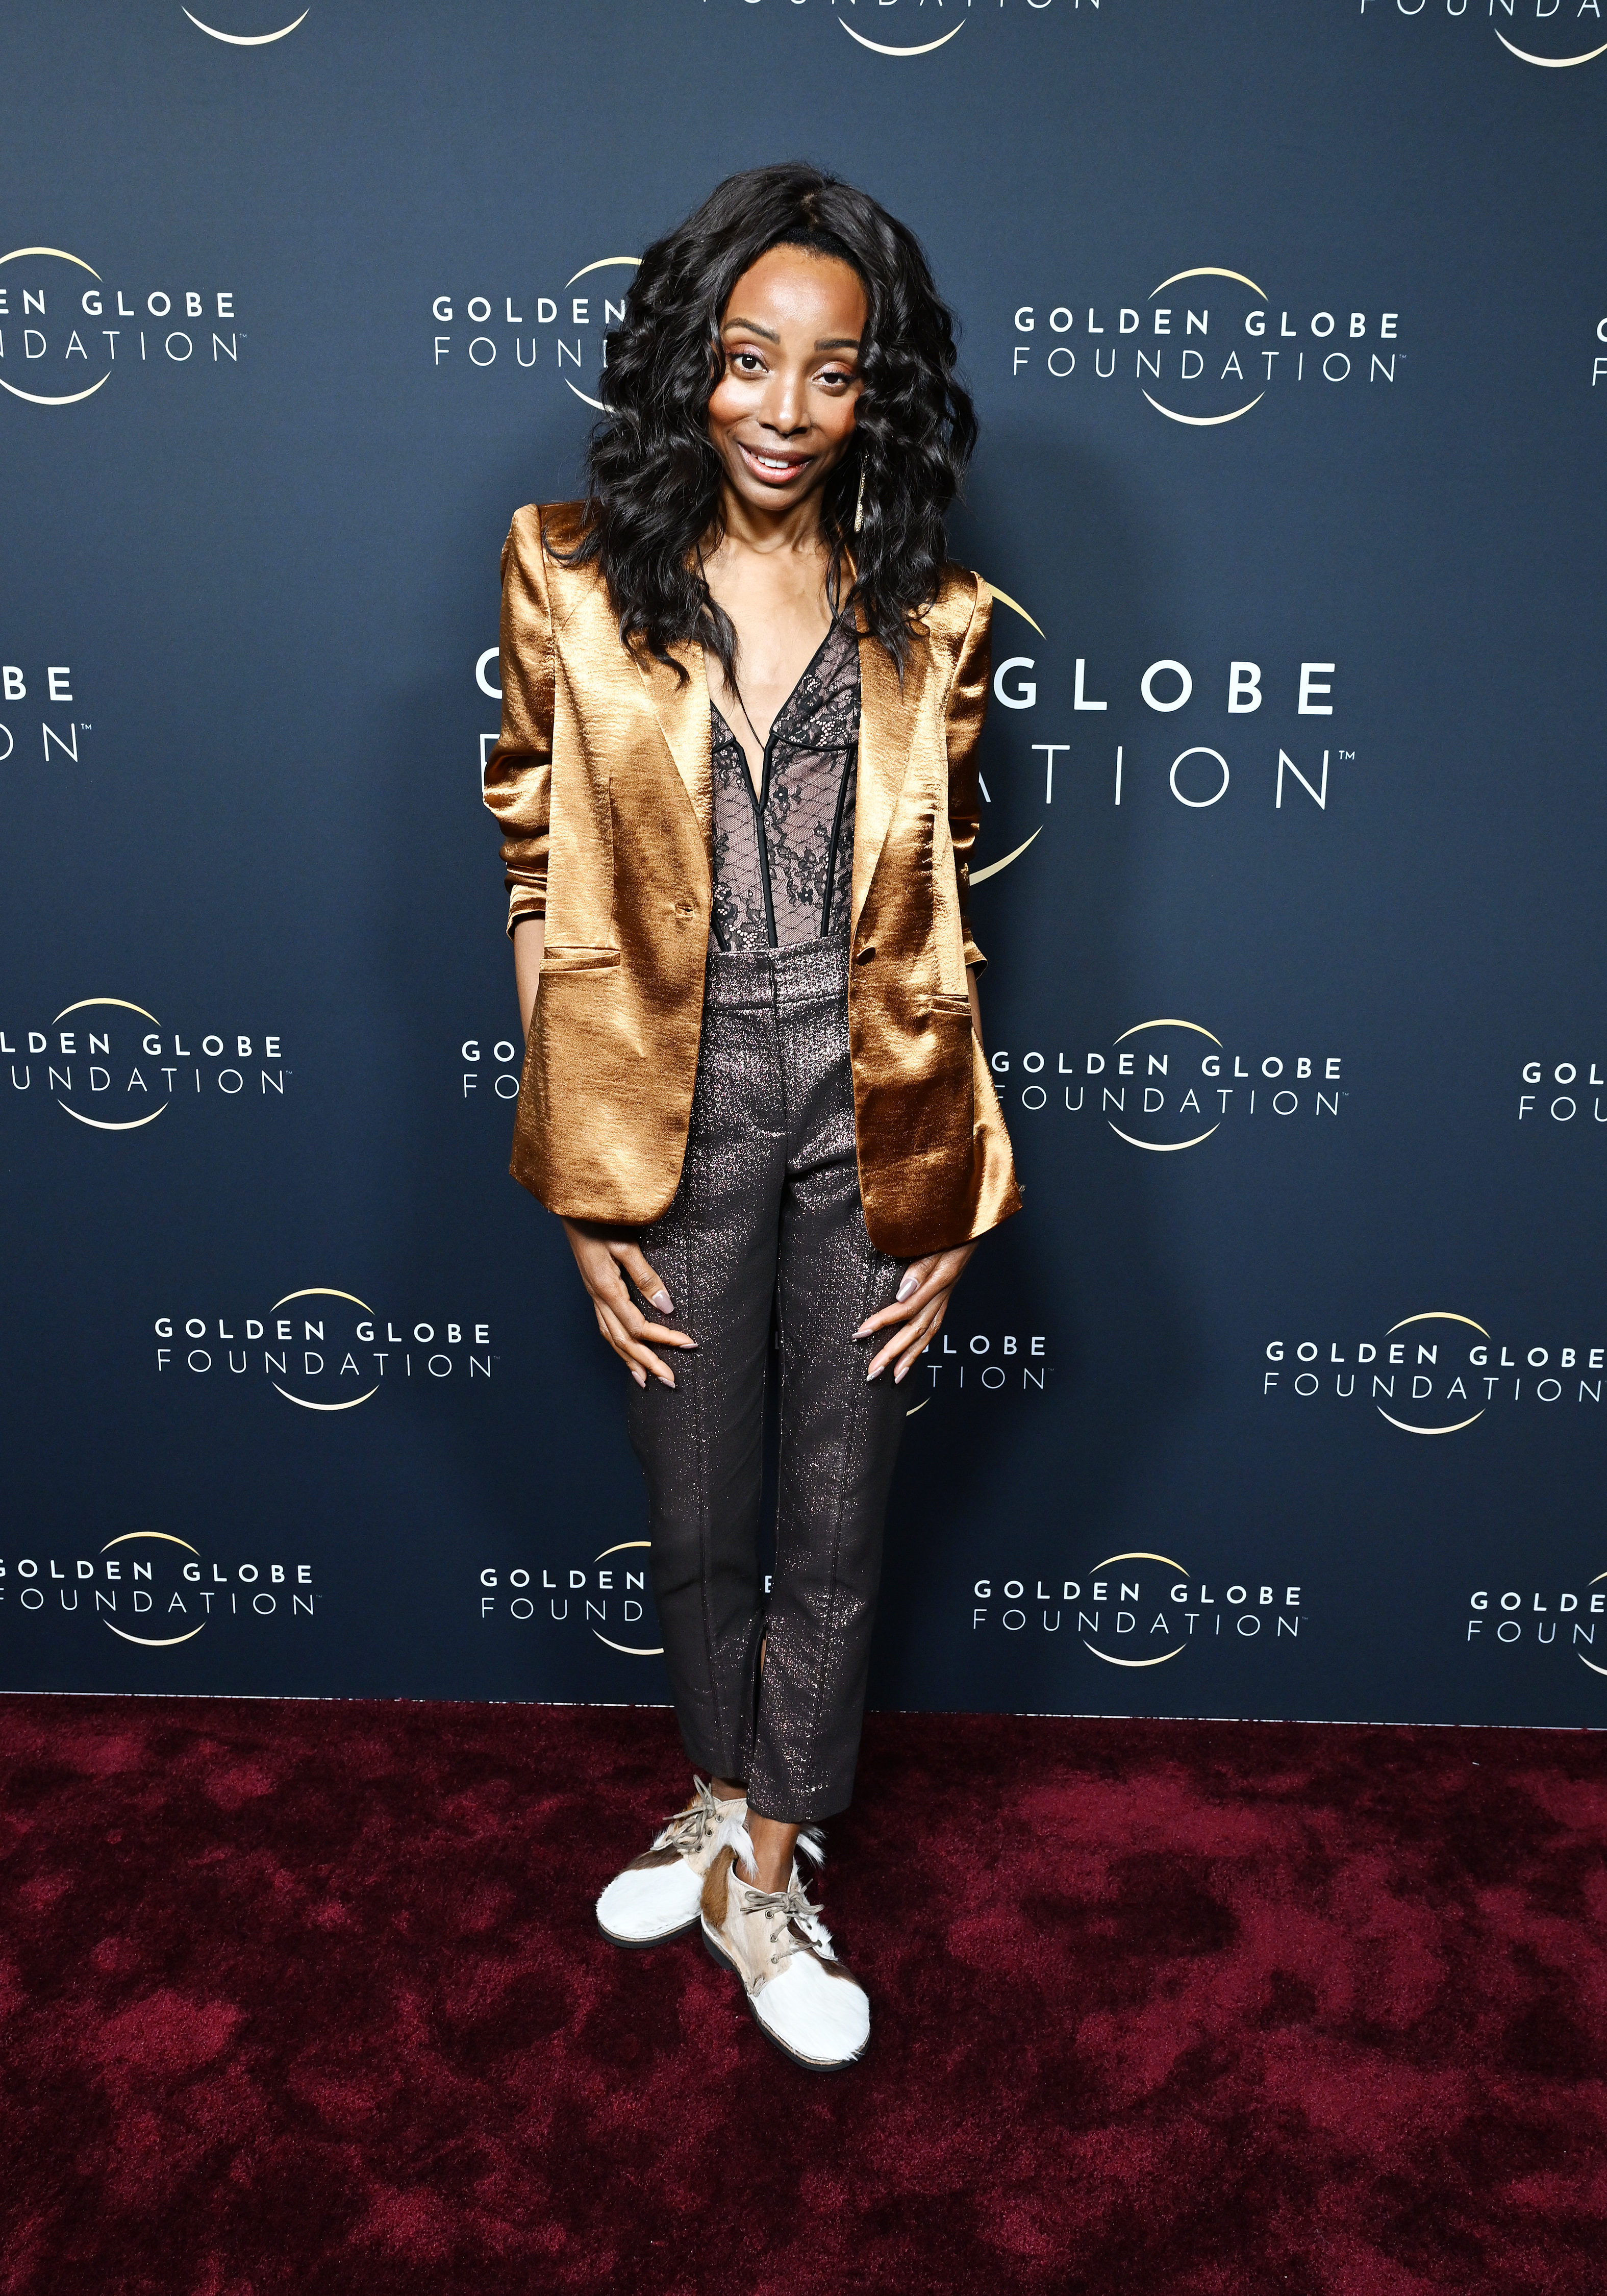 Erica Ash rocks a lace bodysuit and gold blazer at the Golden Globe Foundation Dinner in Beverly Hills, California in January